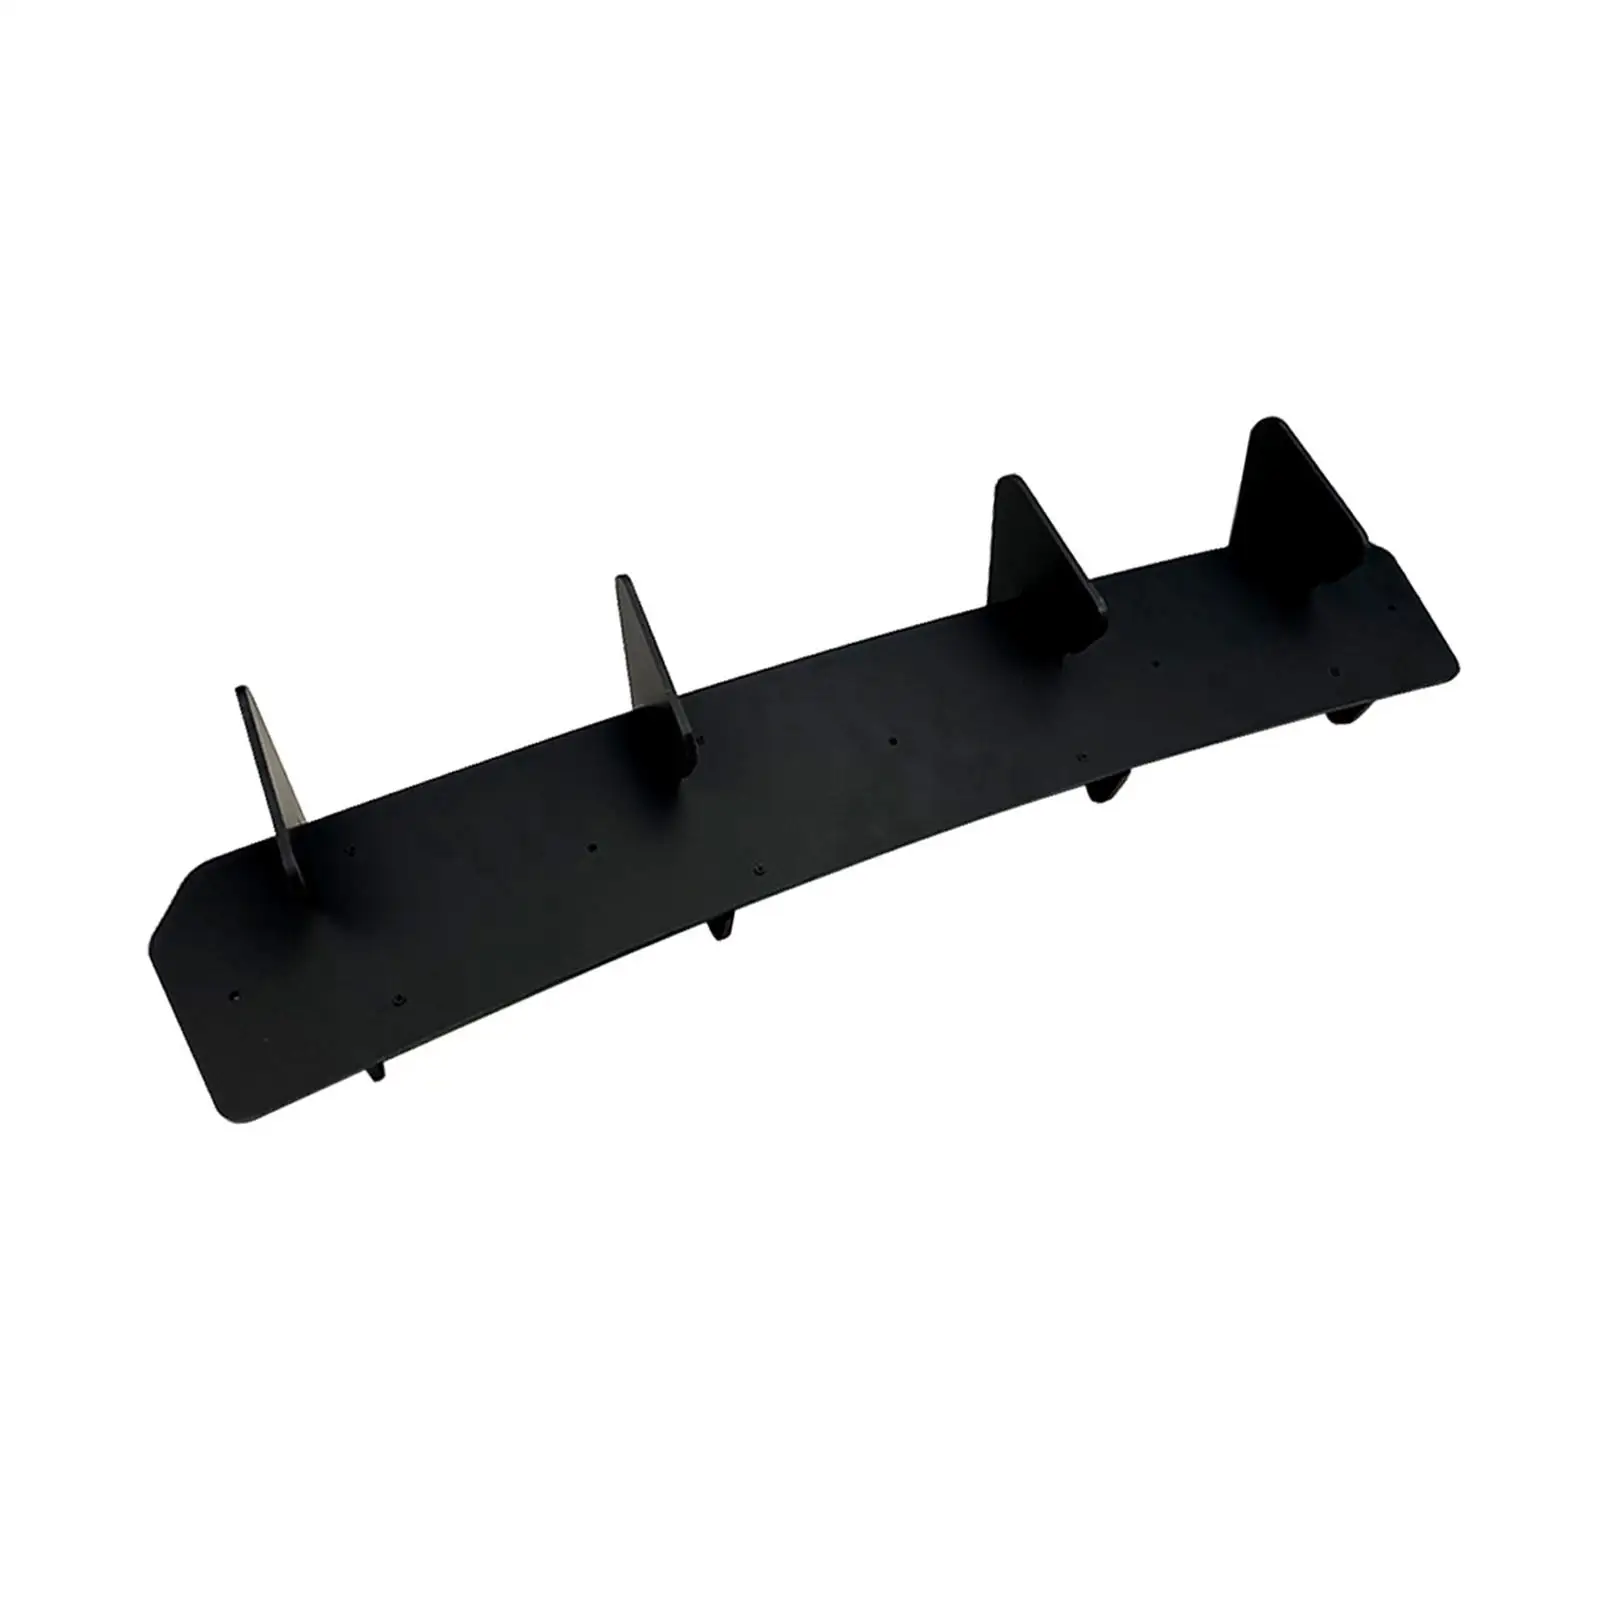 Automotive Car Rear Bumper Diffuser with Side splitters for VW Golf MK7.5 GTI Black Color Accessory Lightweight Durable